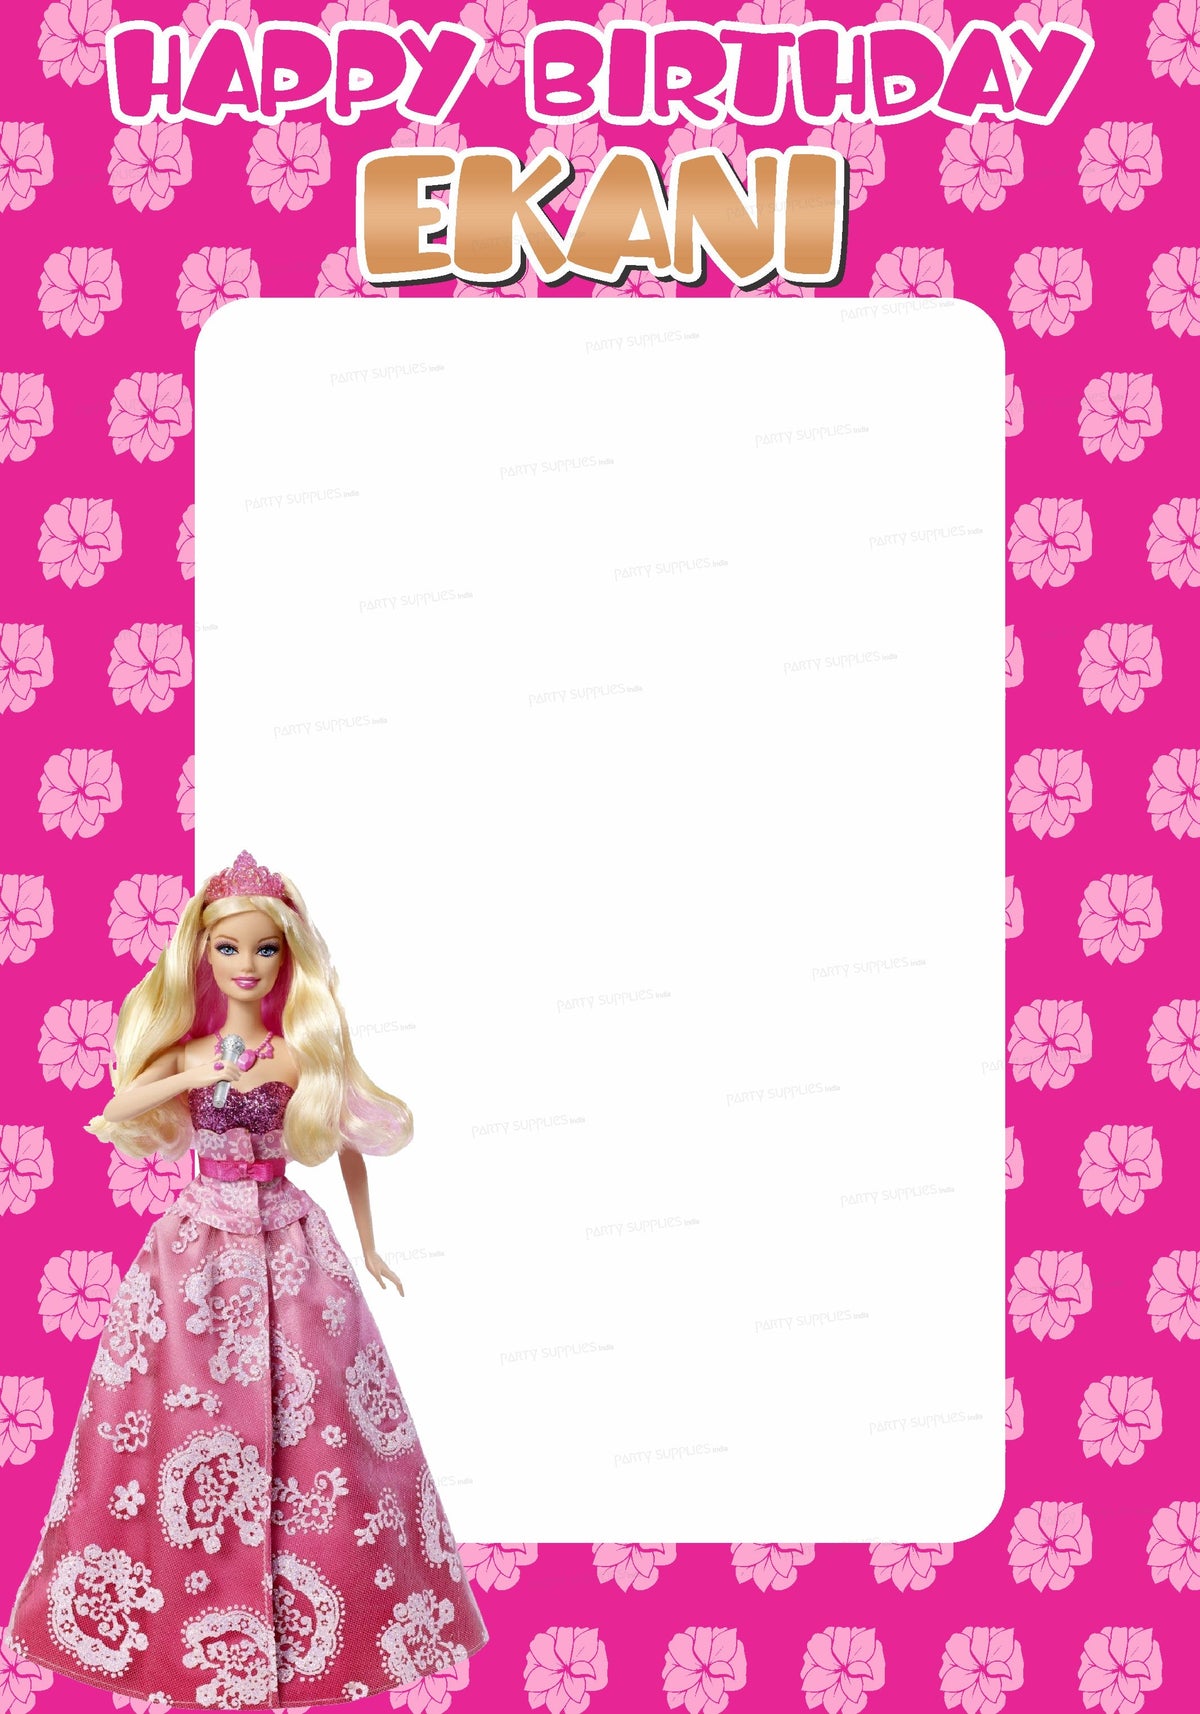 PSI Barbie Theme Personalized PhotoBooth